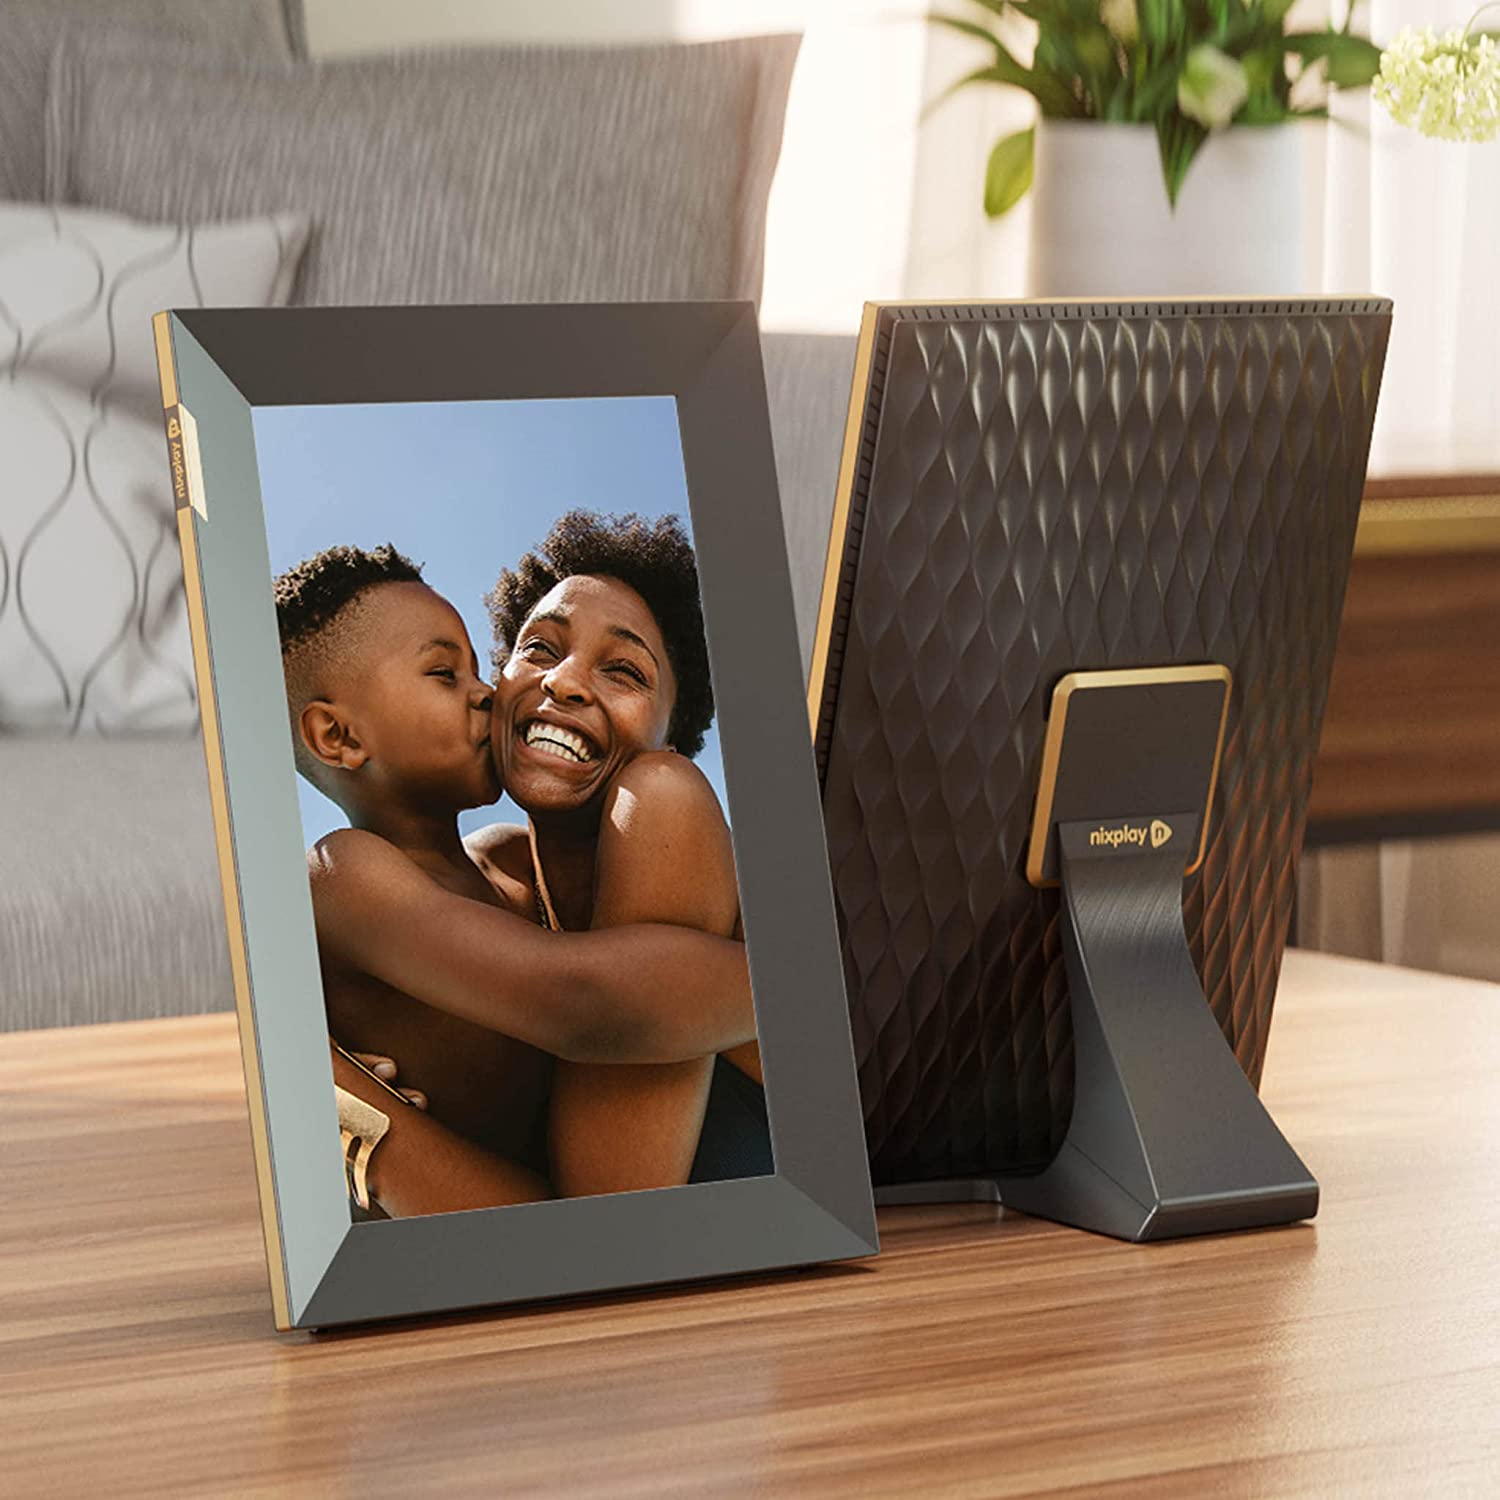 Nixplay 10.1 inch Touch Screen Digital Picture Frame with WiFi (W10K), Black-Gold,  Share Photos and Videos Instantly via Email or App